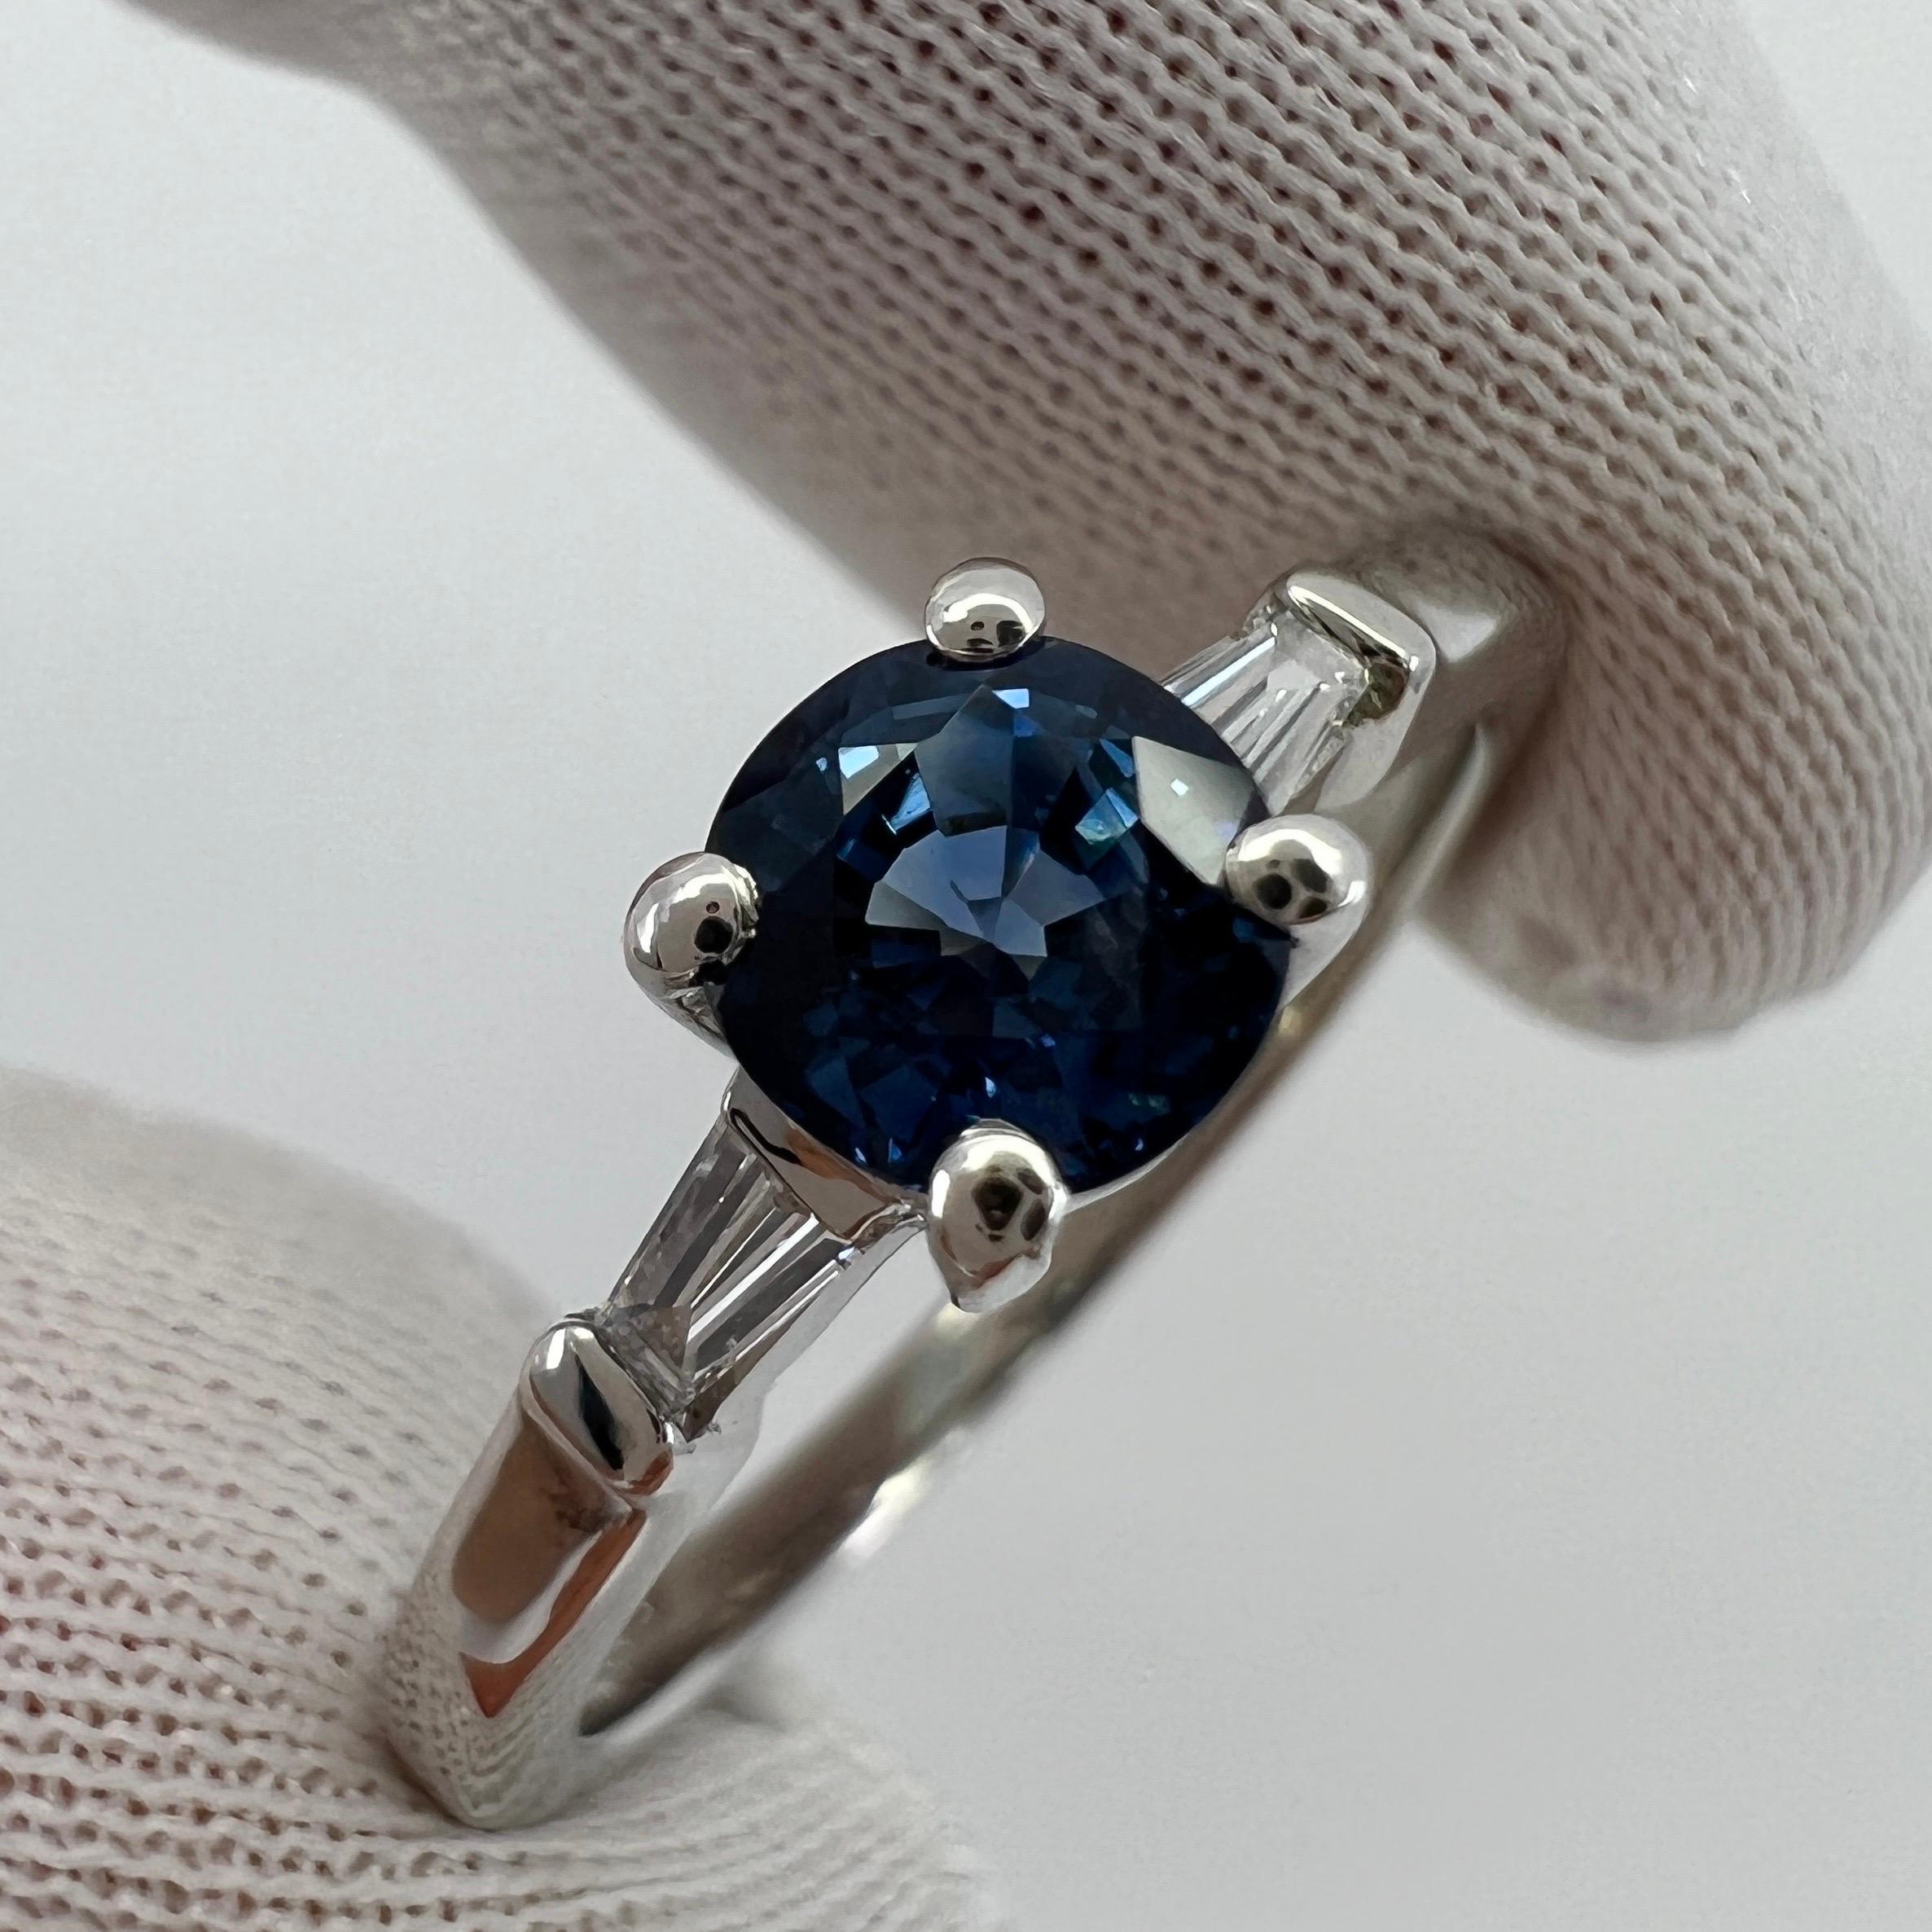 Peacock Blue Sapphire & Tapered Baguette Diamond 18k White Gold Three Stone Ring.

Fine 0.71 Carat sapphire with a stunning vivid 'peacock' blue colour and excellent clarity. Very clean stone.
Also has an excellent round brilliant cut which shows